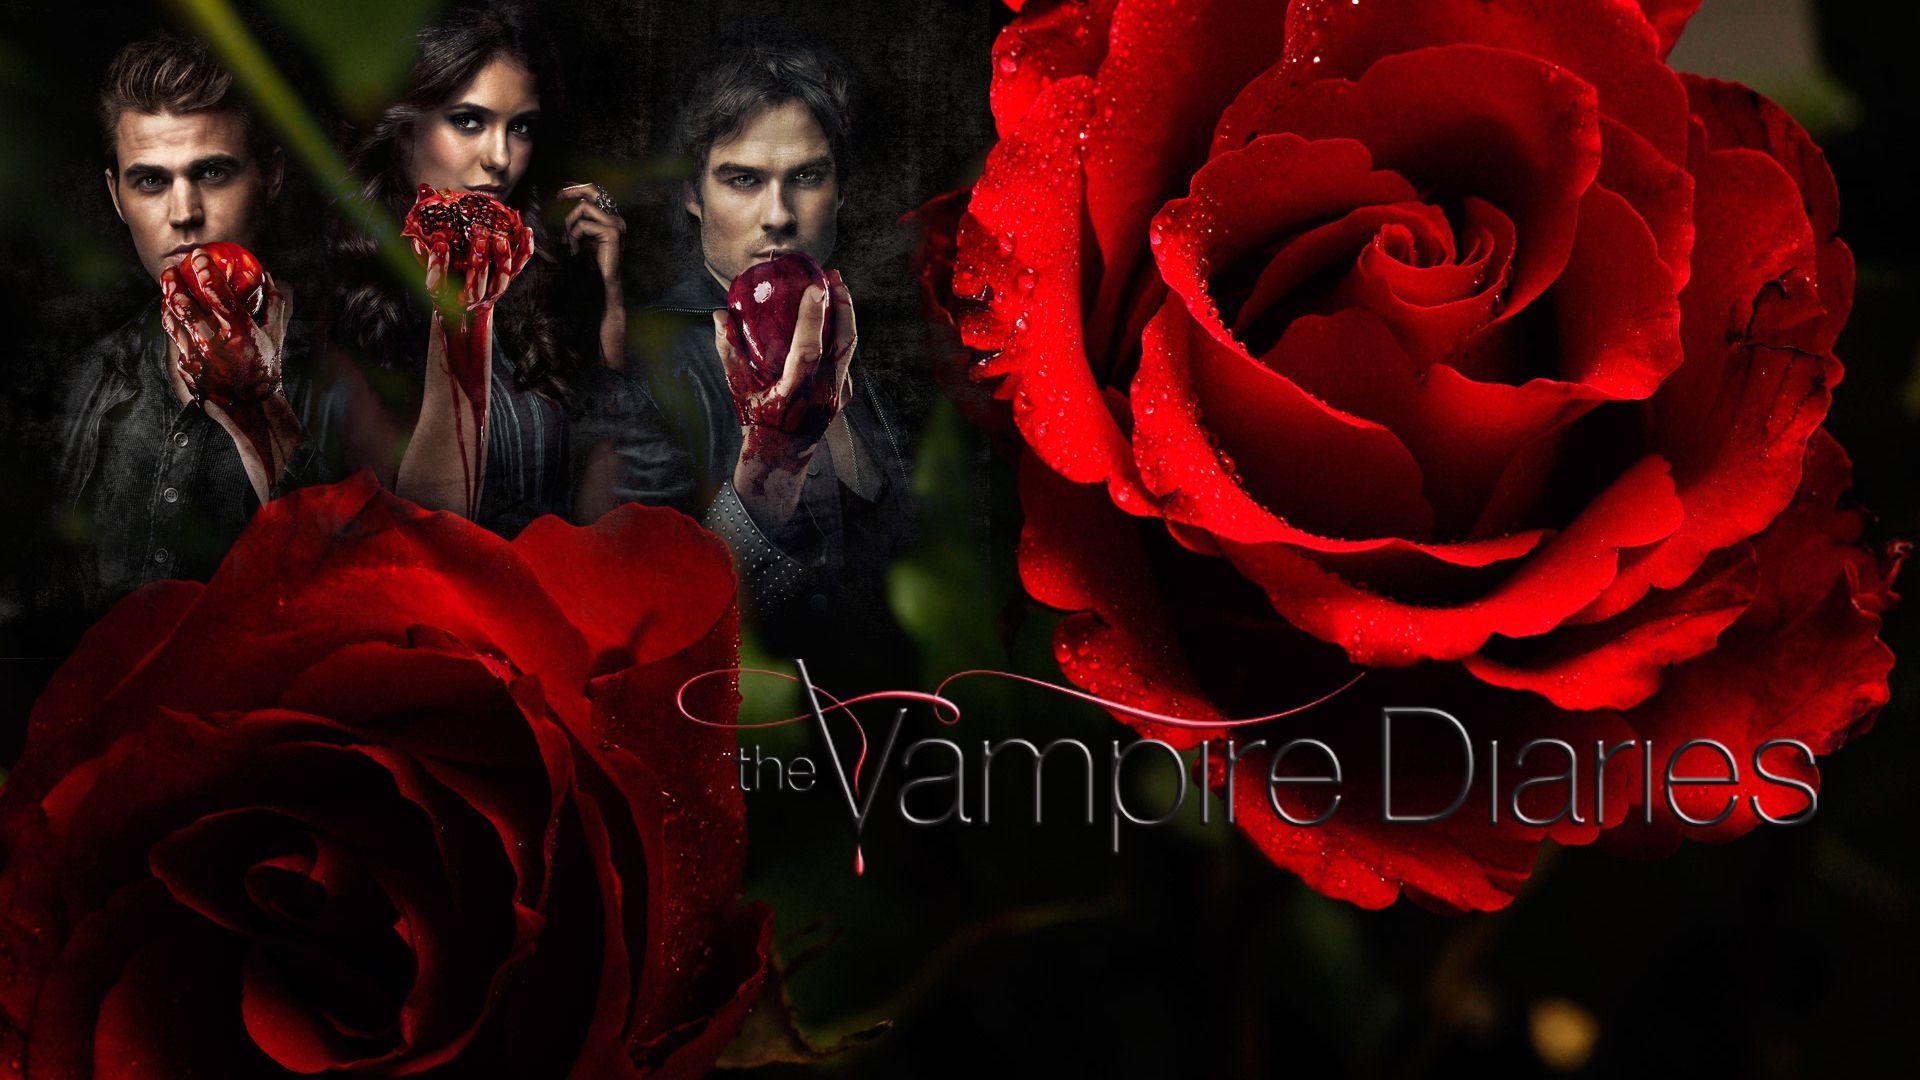 The Vampire Diaries Cast Background